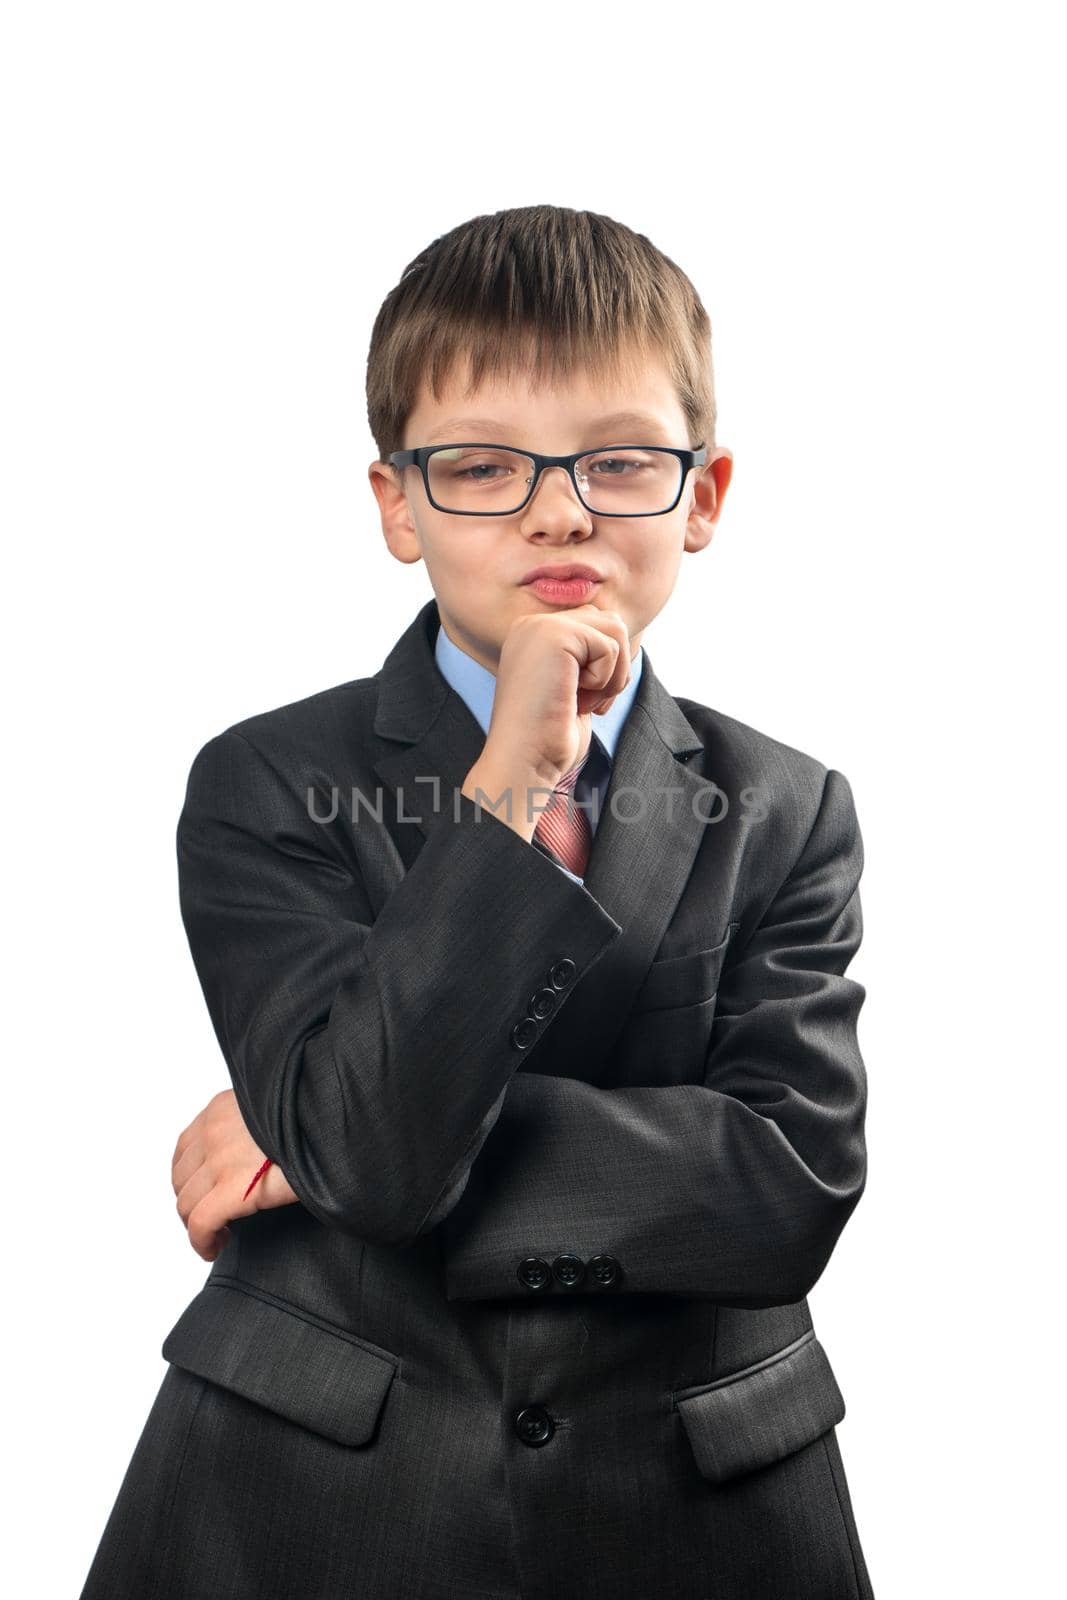 Portrait of a schoolboy making these faces on a white background